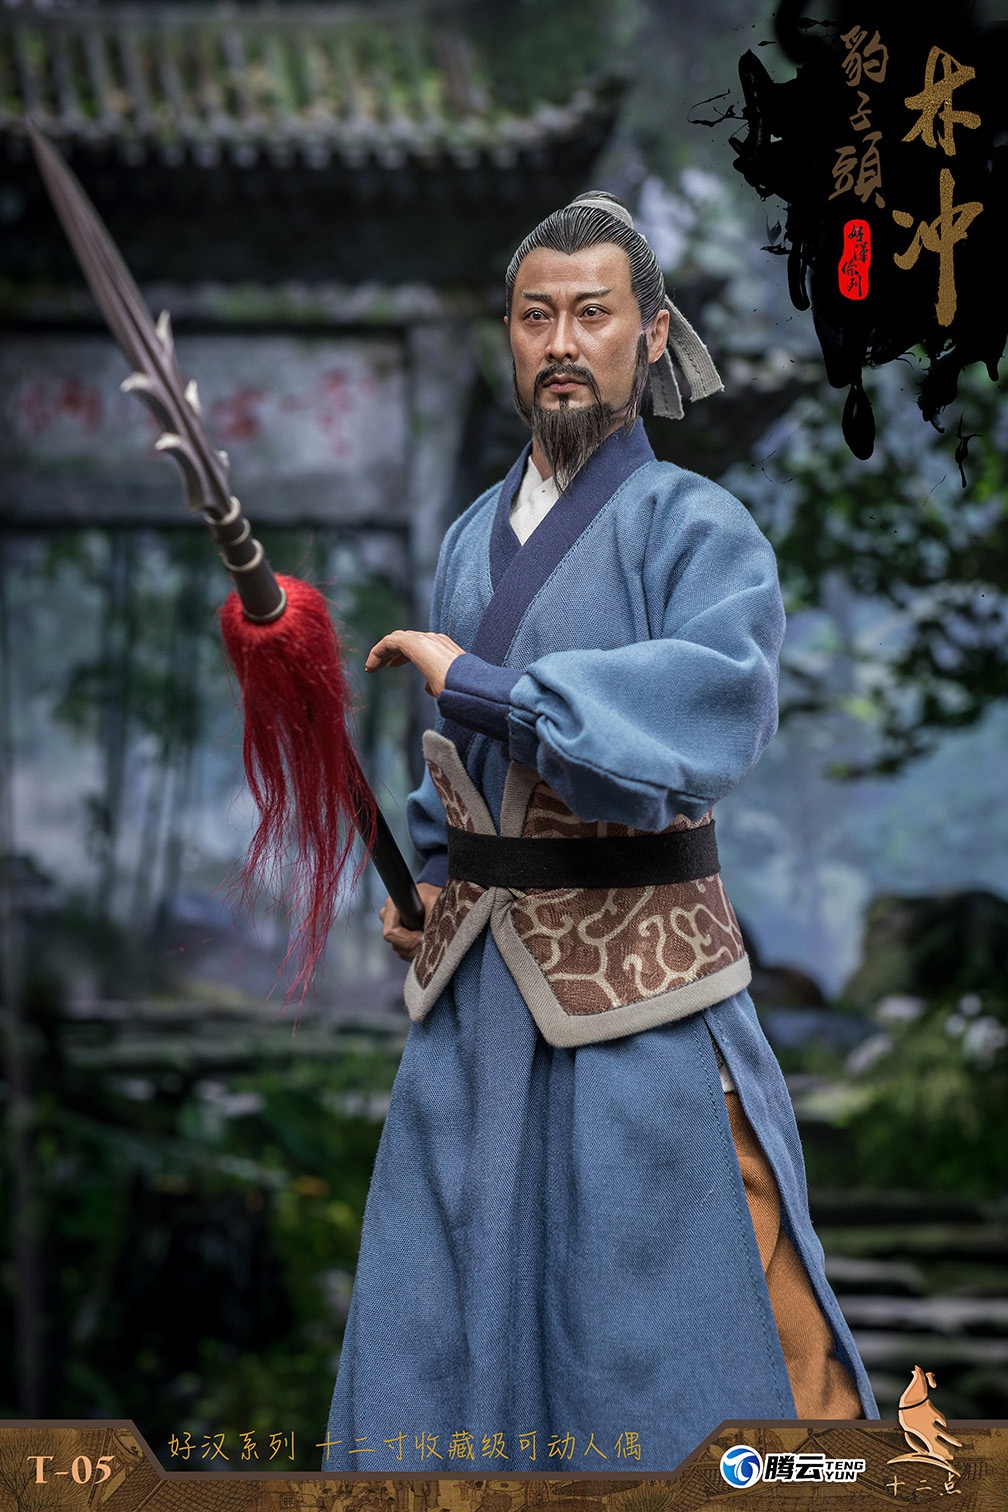 NEW PRODUCT: Twelve - Hero Series - Leopard Head Lin Chong Fengxue Mountain Temple Action Figure (T-05 /T-06) 08104